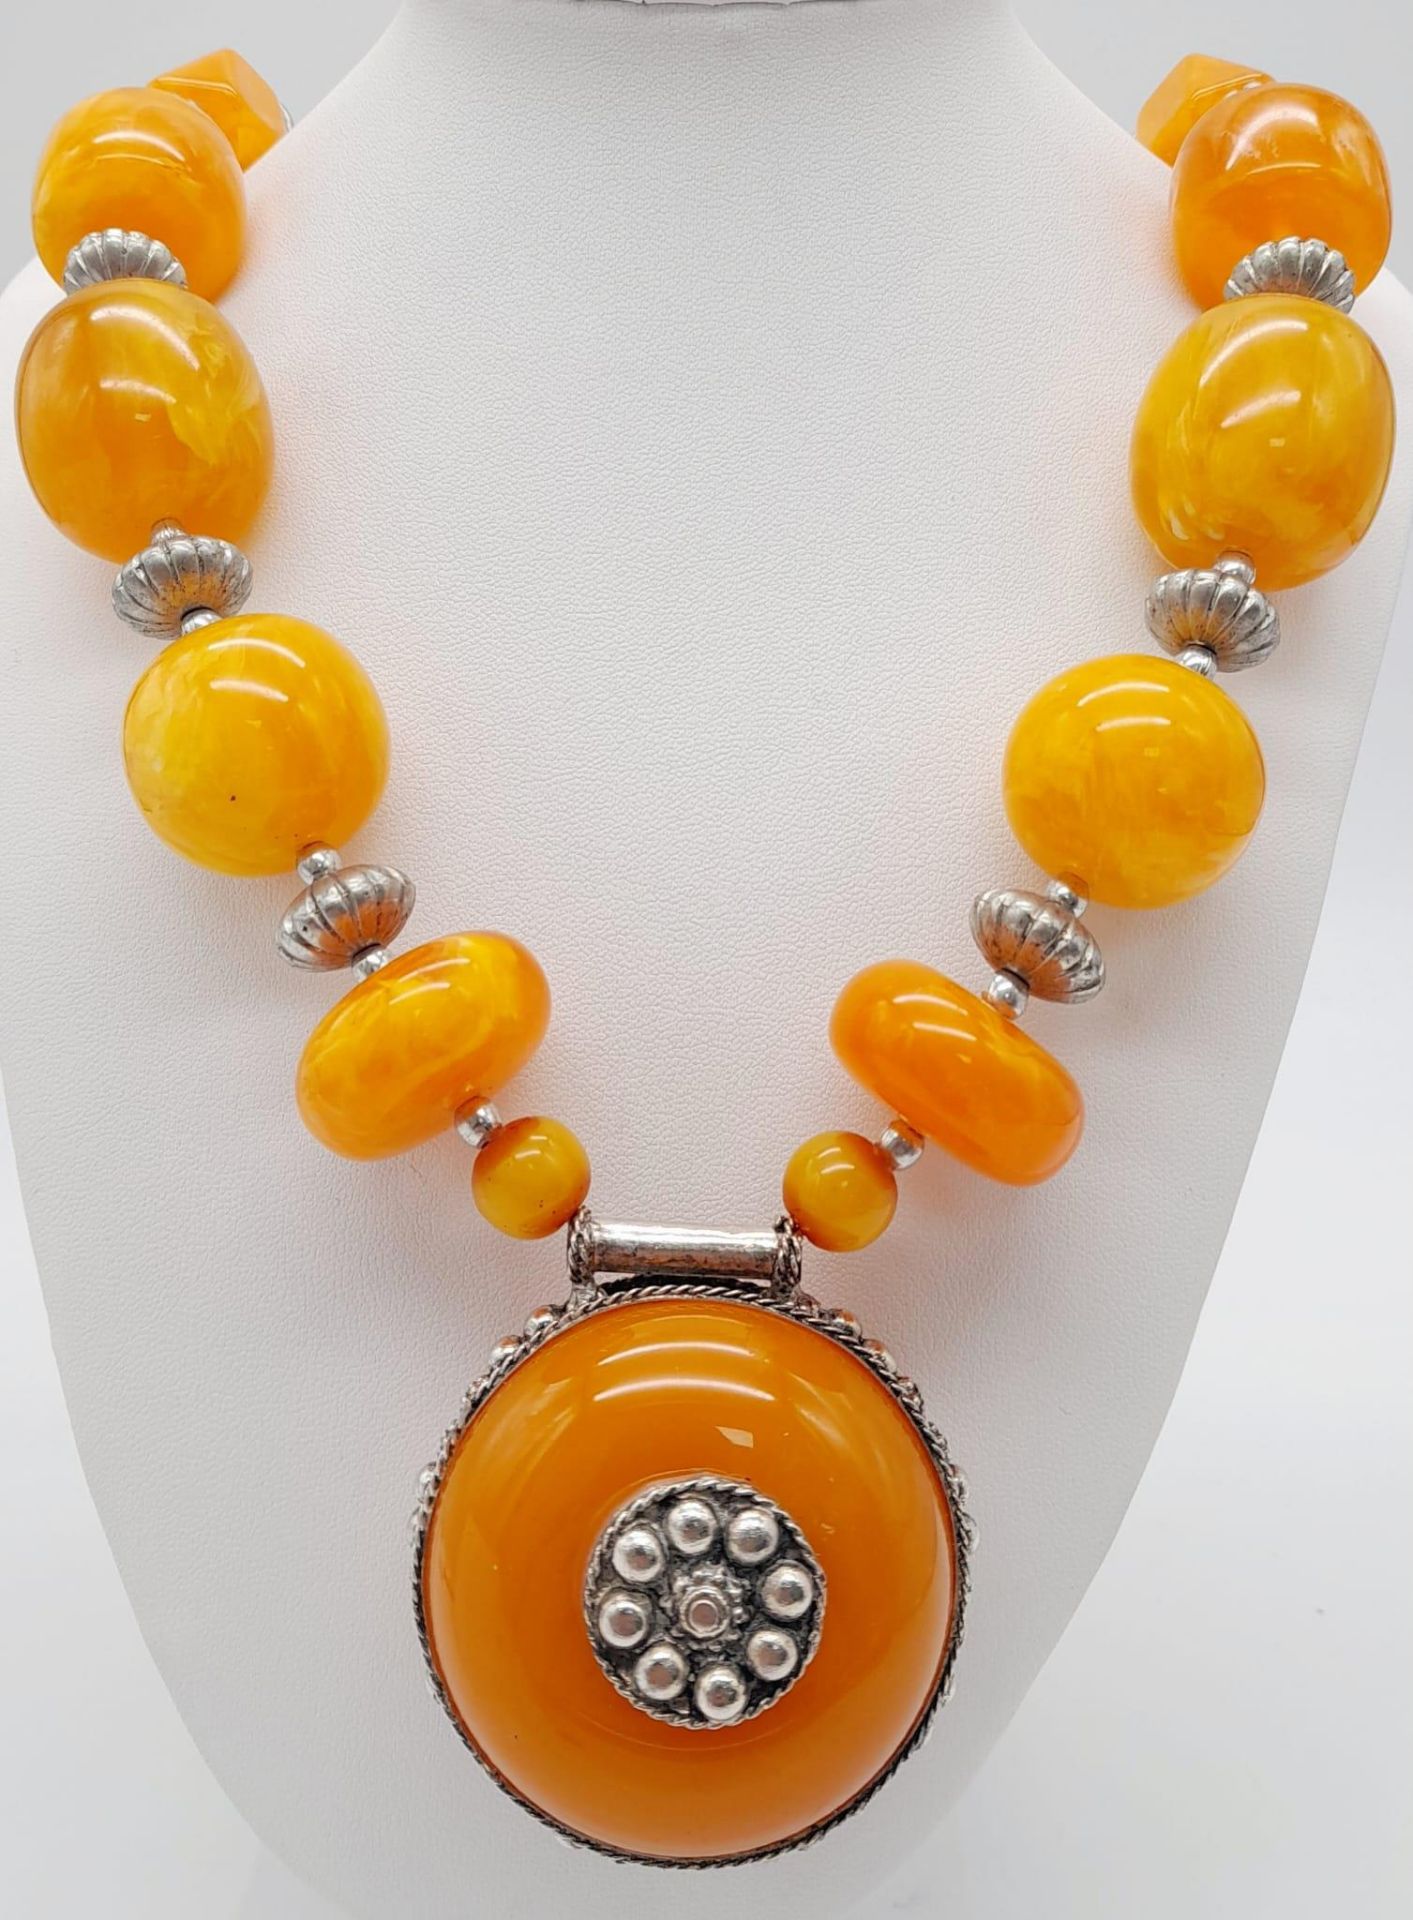 A Berber Amber Resin Statement Necklace and Pendant. 56cm length. - Image 3 of 7